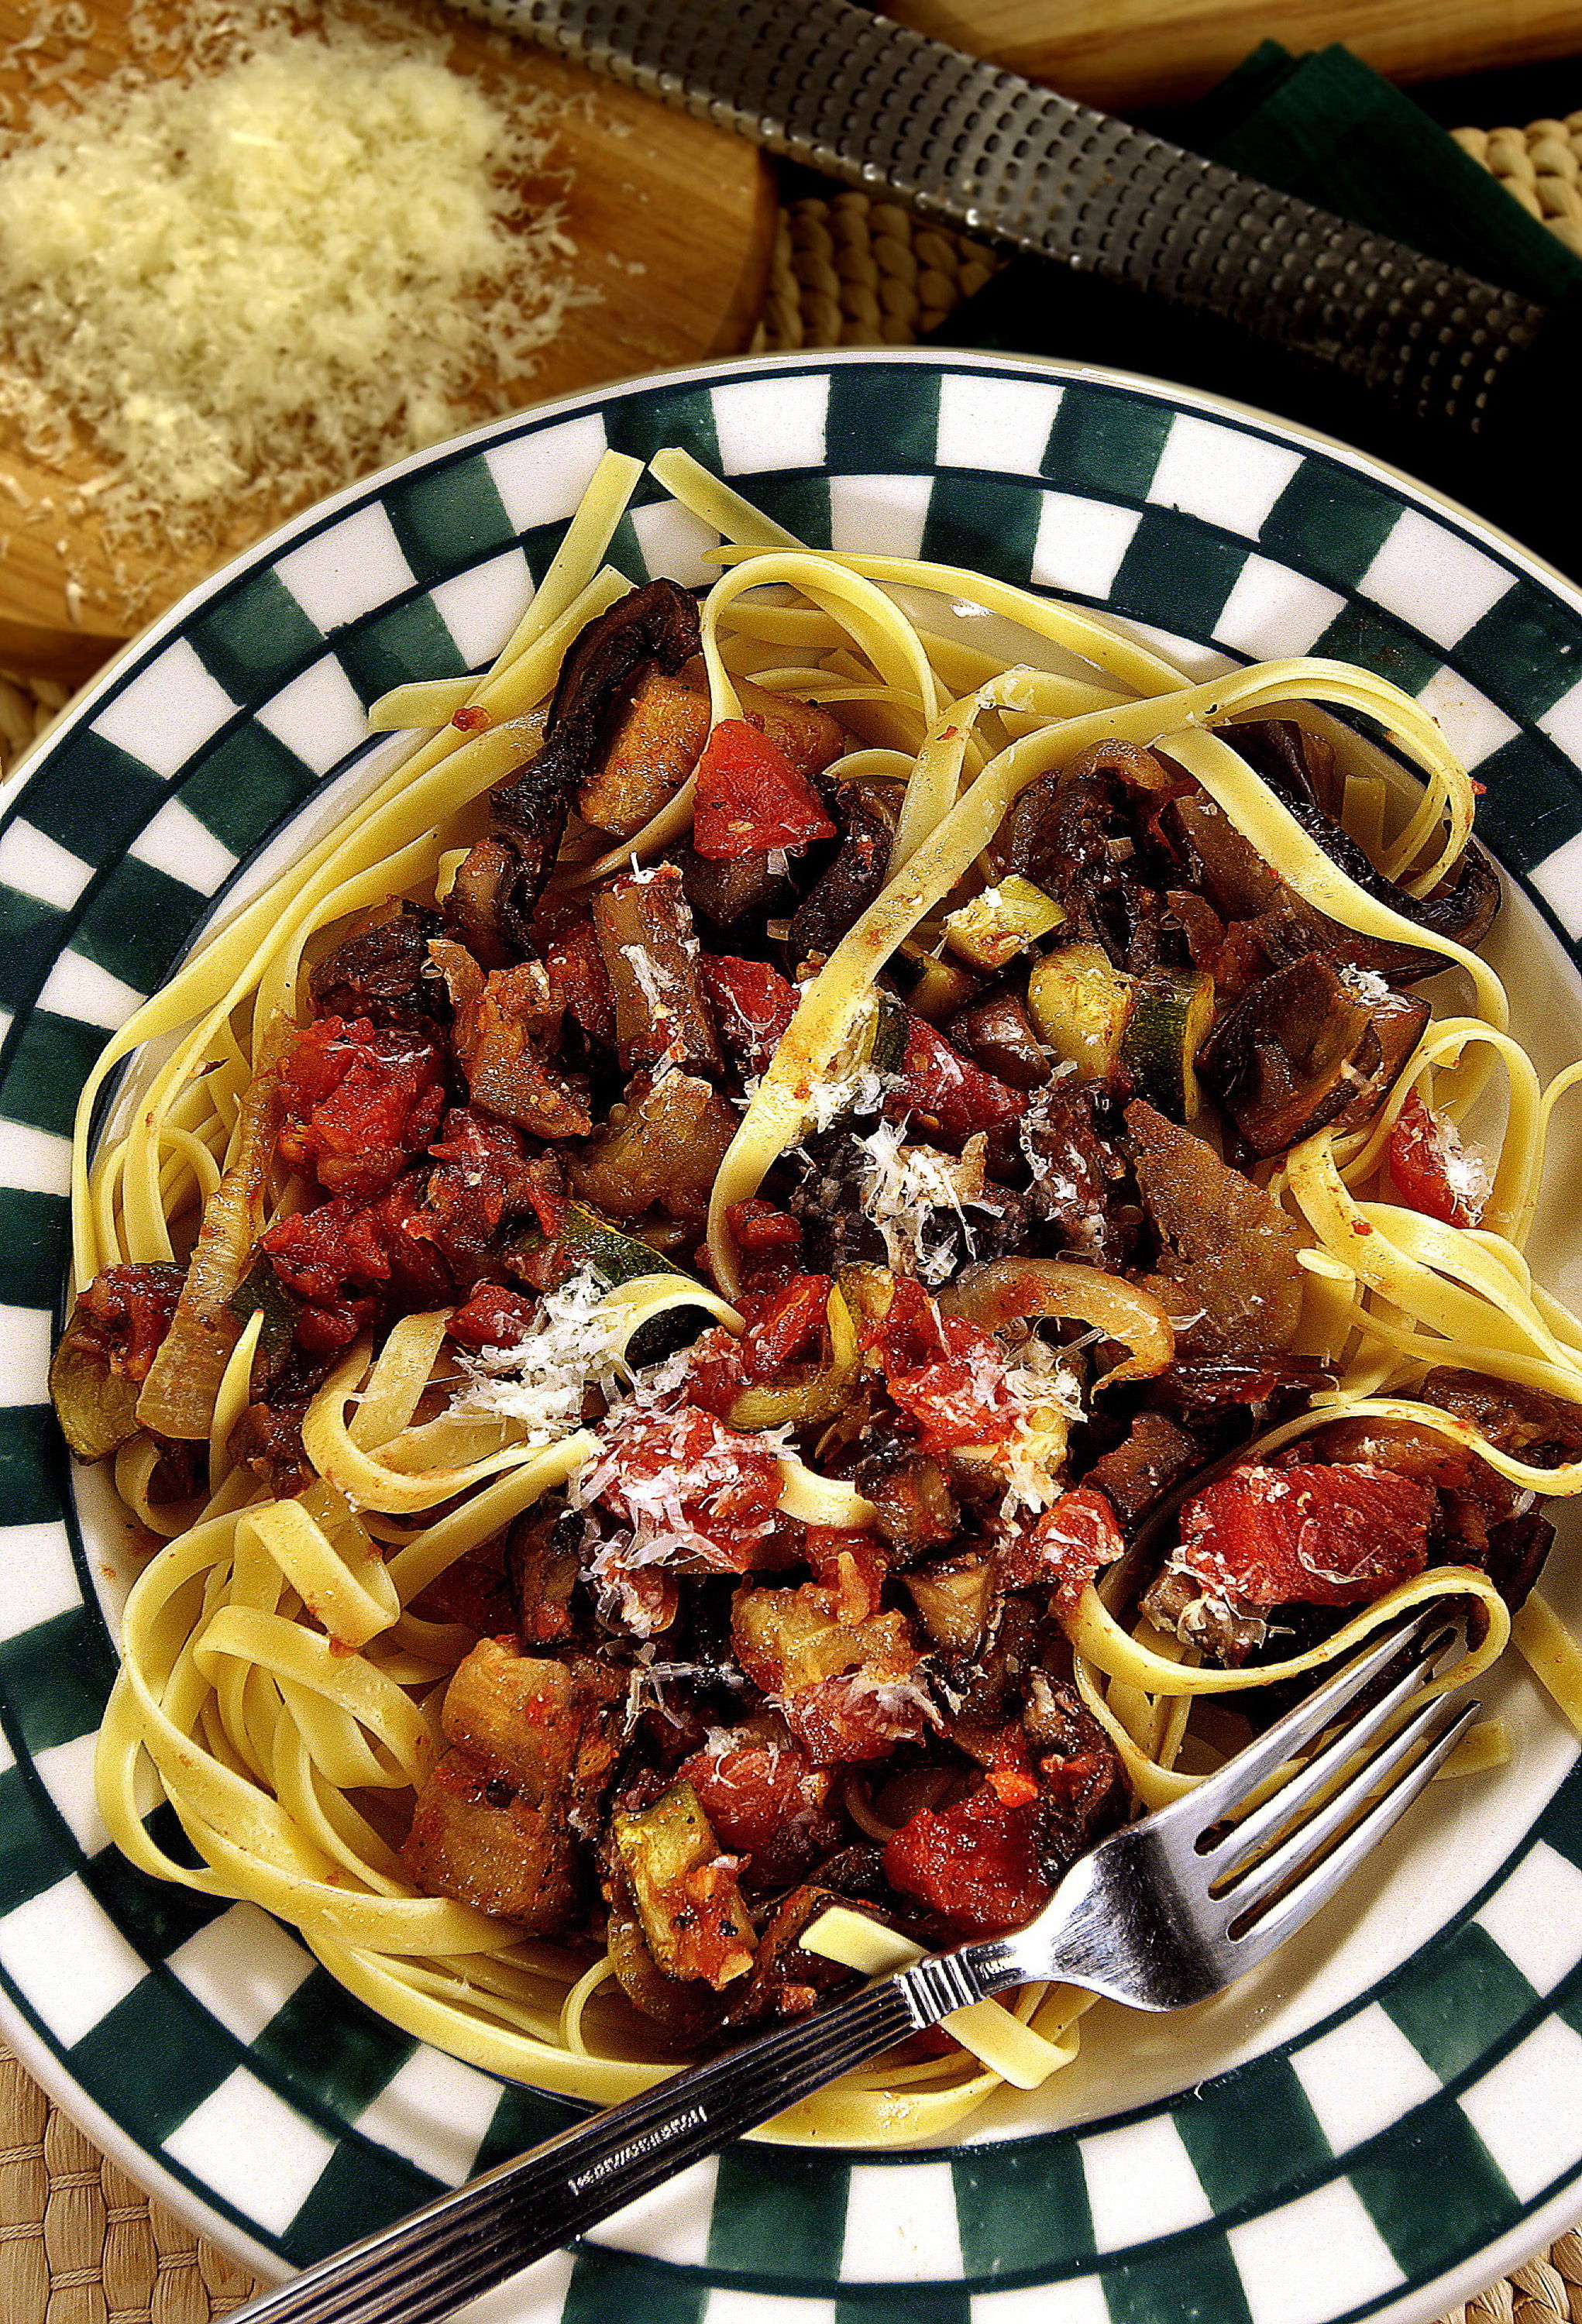 Bob Fila / Chicago Tribune / TNS Eggplant, zucchini and onions are roasted to sweeten their flavors, then are tossed with fettuccine for a simple, robust meal.